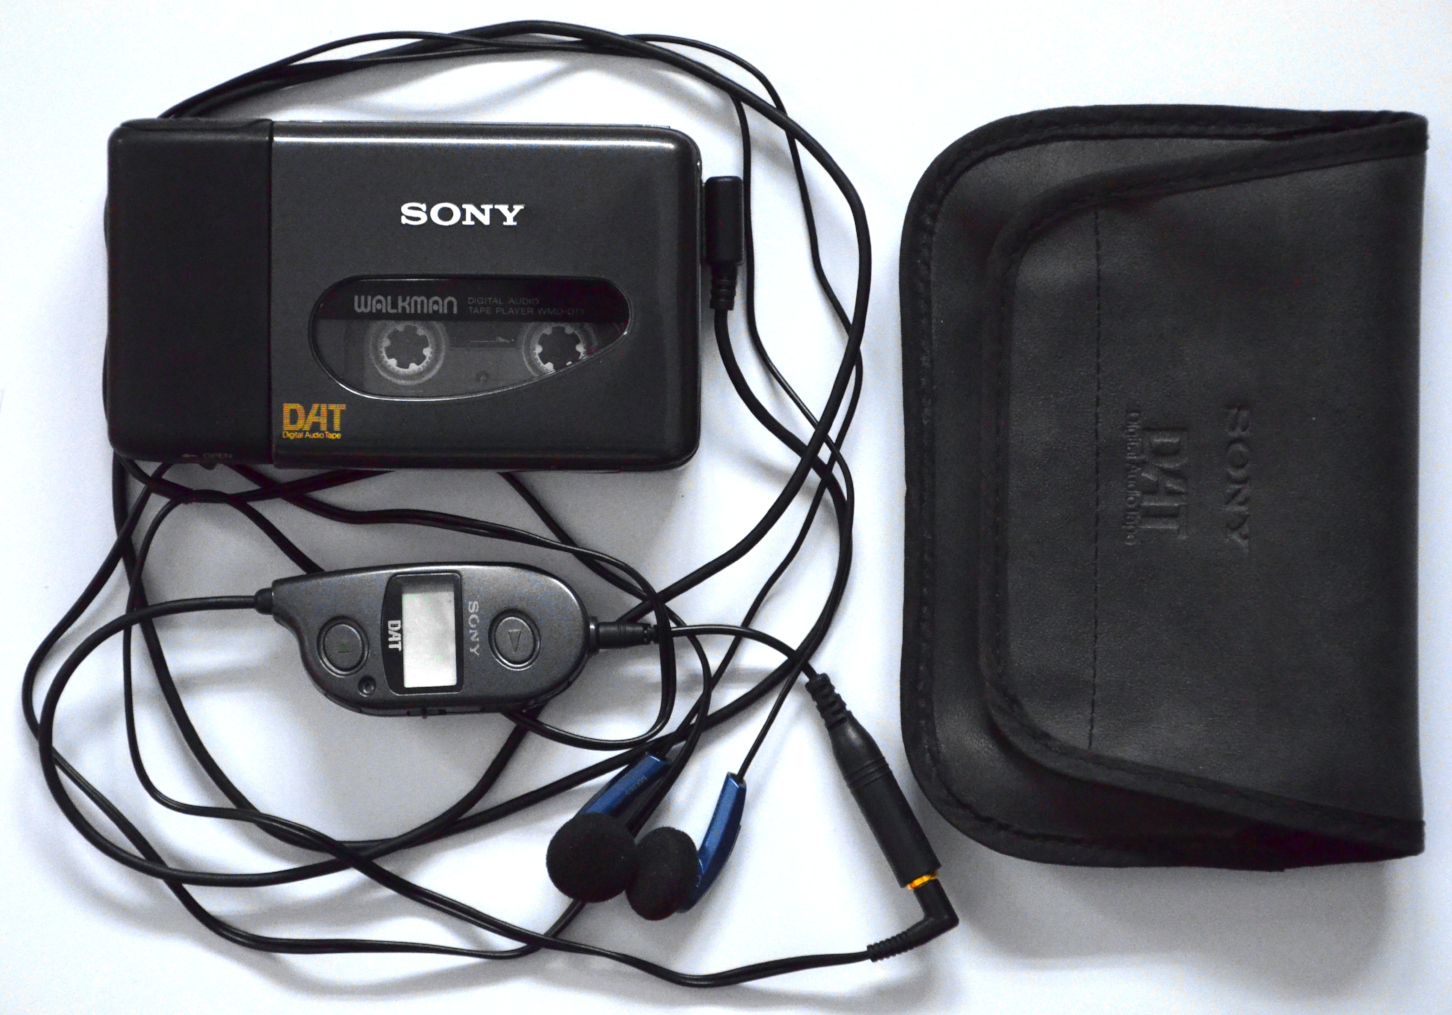 SONY WMD-DT1